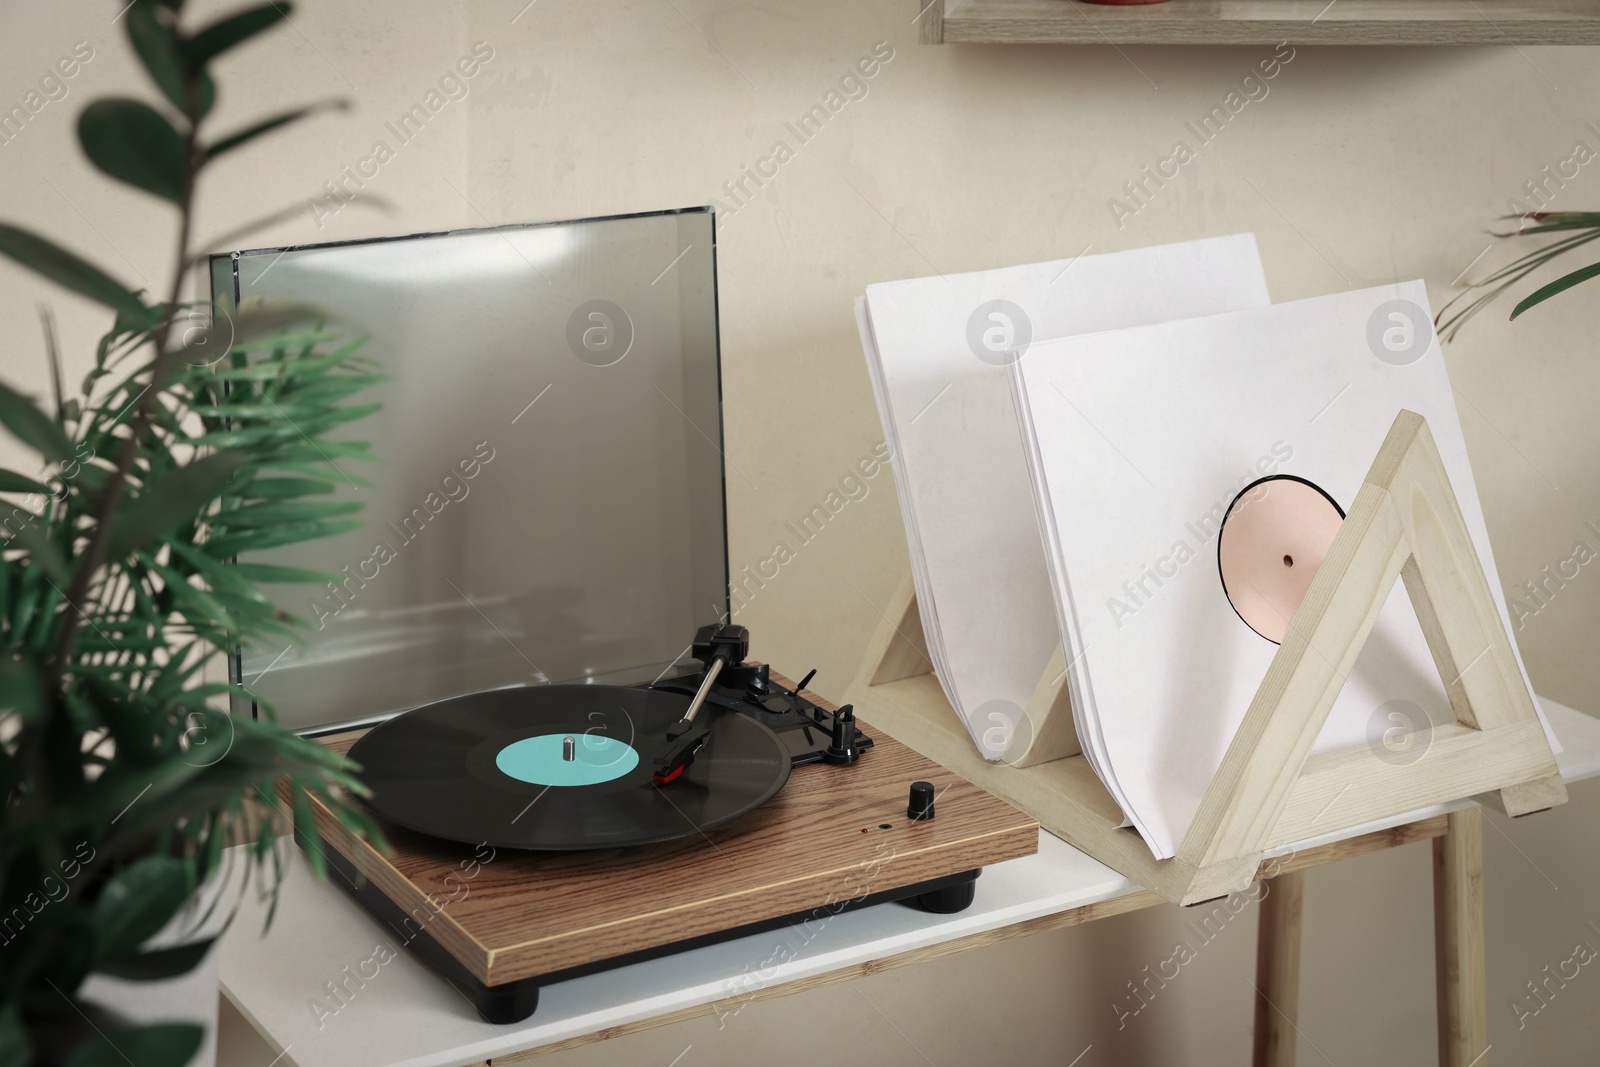 Image of Stylish turntable with vinyl record on wooden table in room